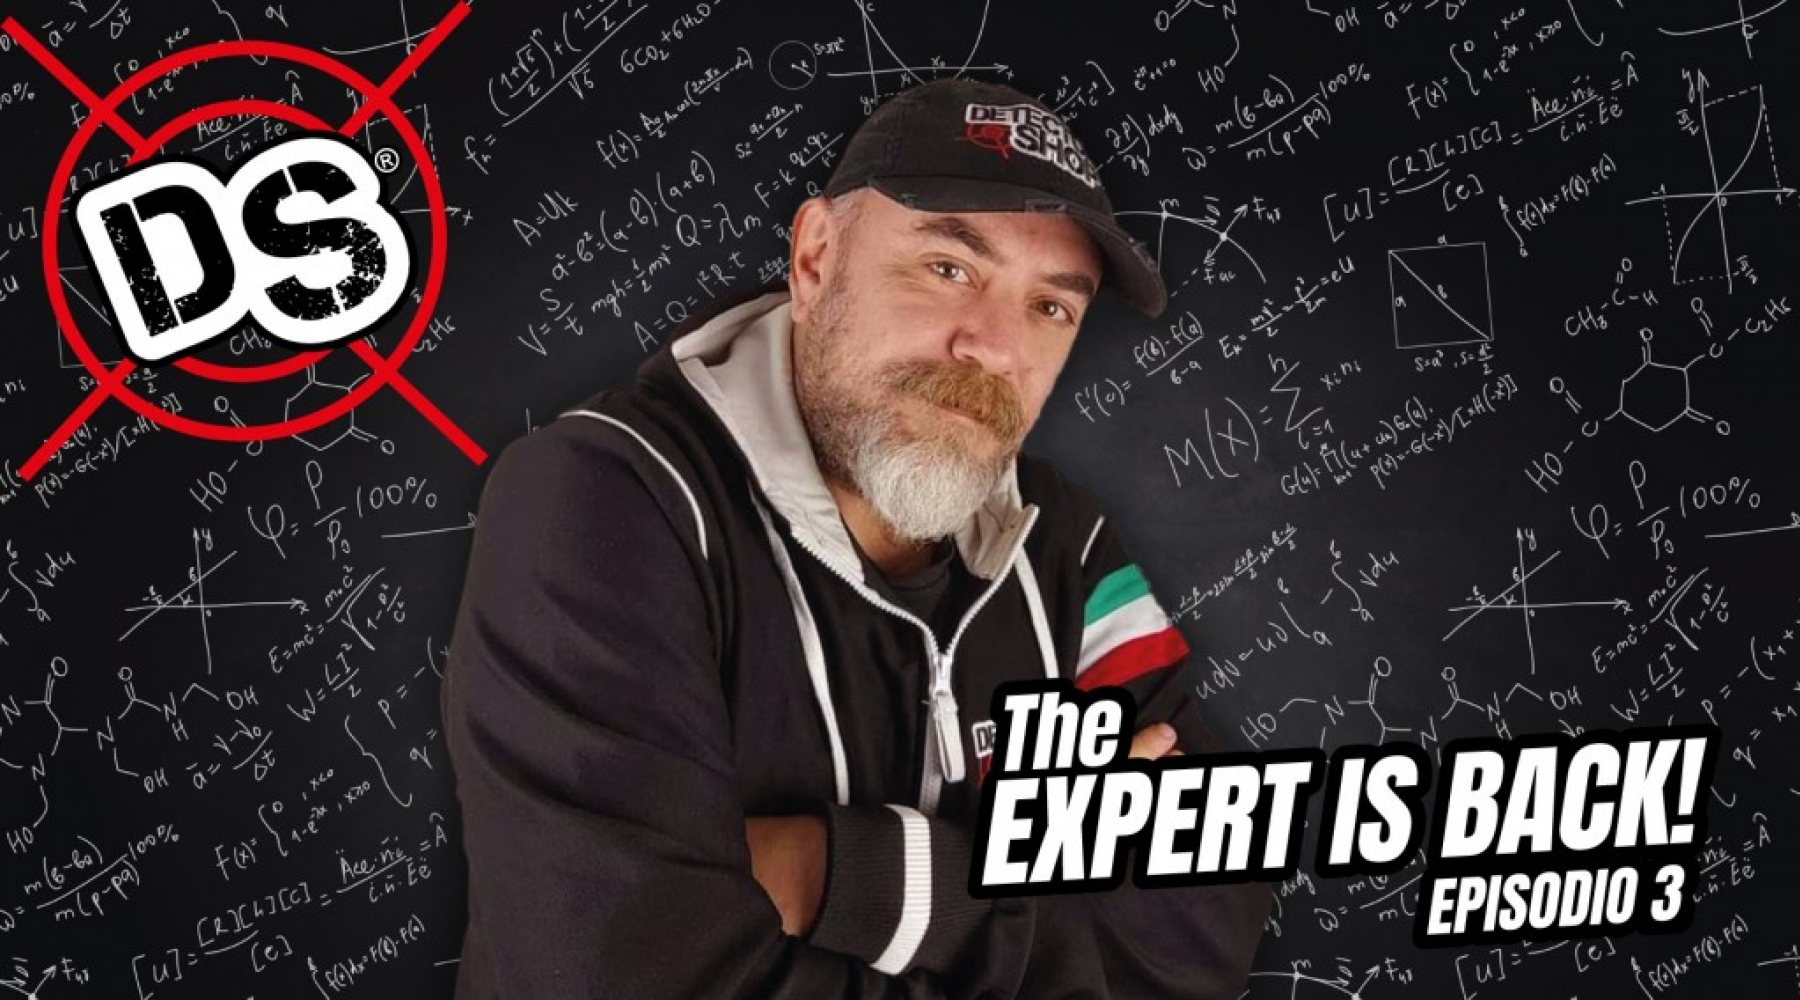 The Expert is back! Ep. 3